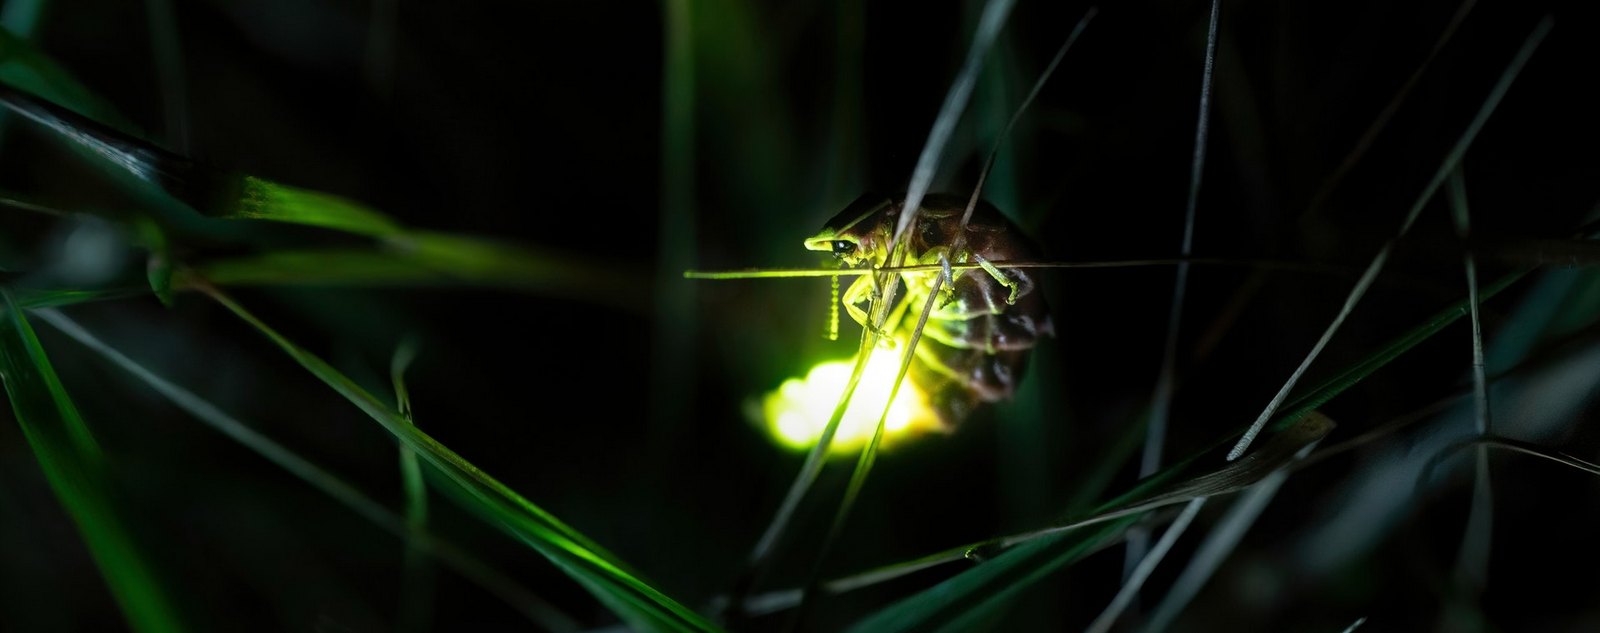 The appearance of fireflies